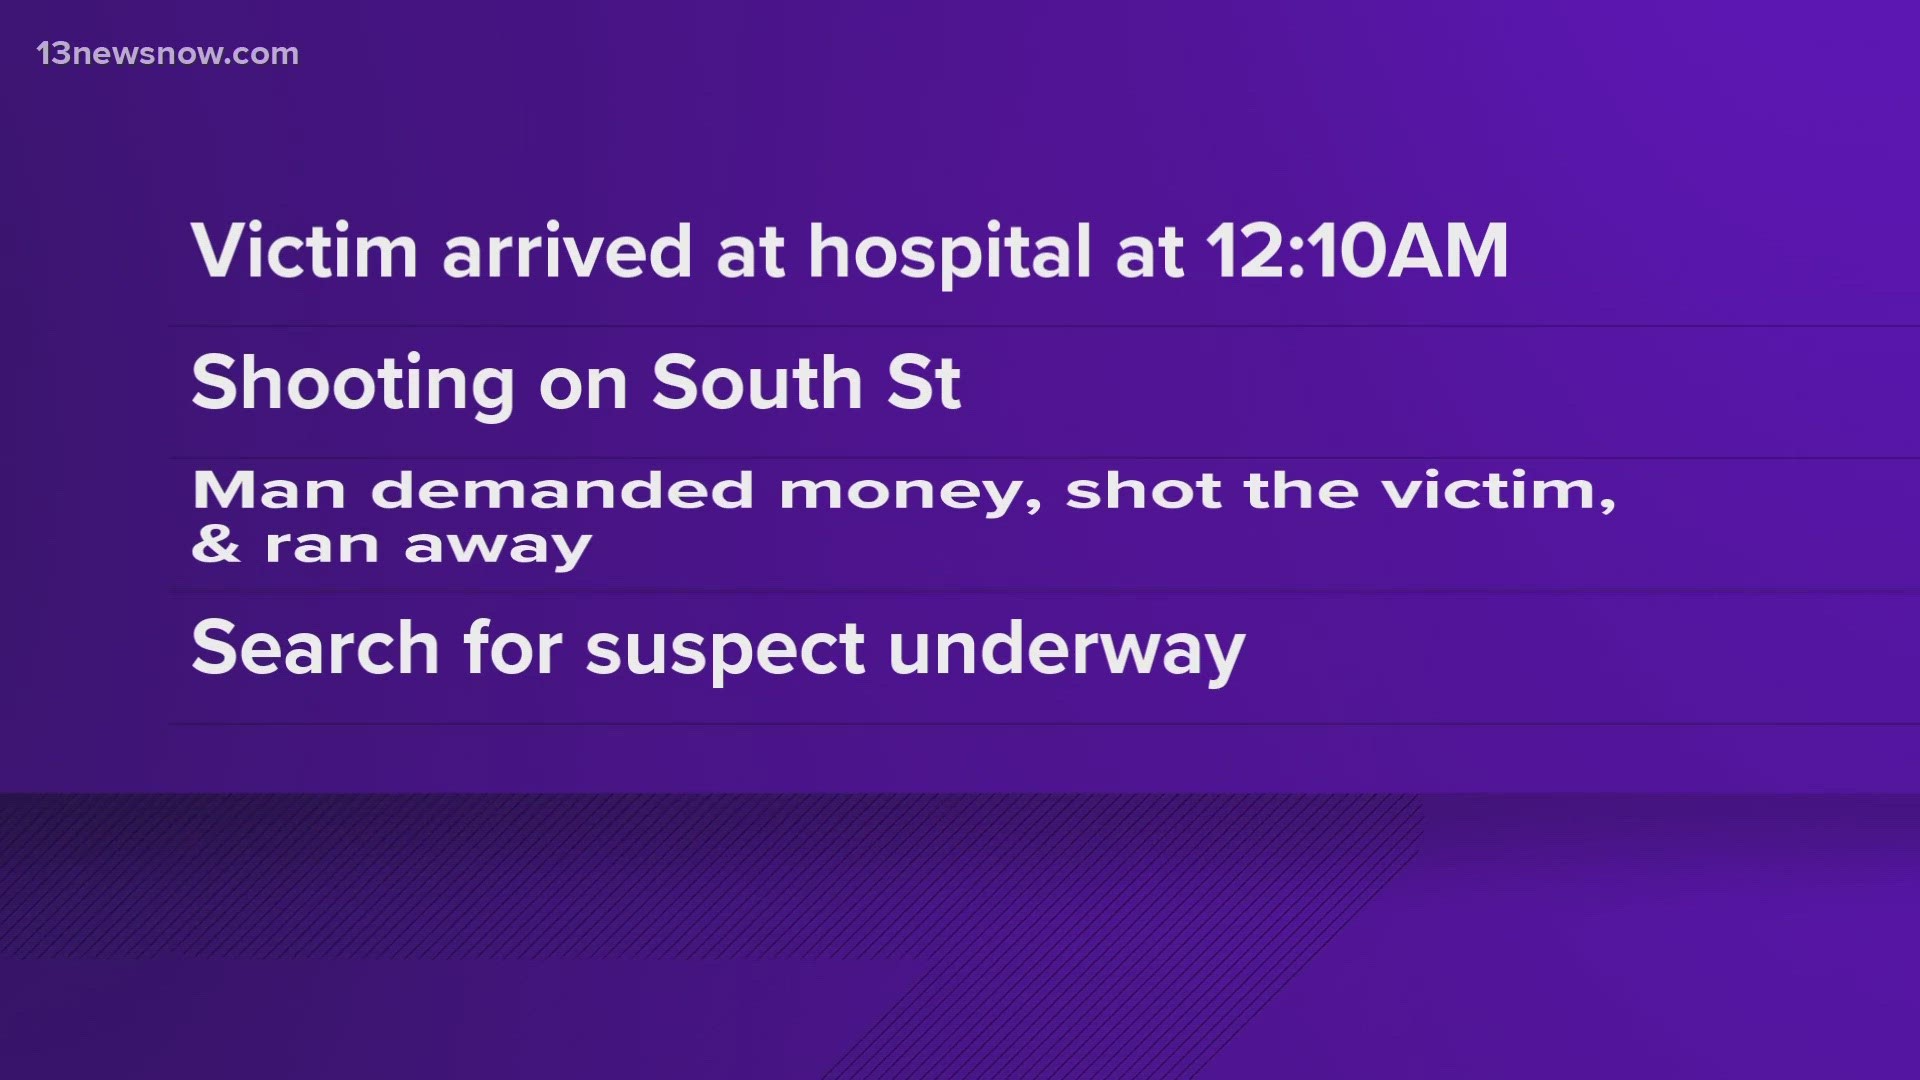 According to police, the victim drove to the hospital just after midnight on Monday, and is expected to recover.